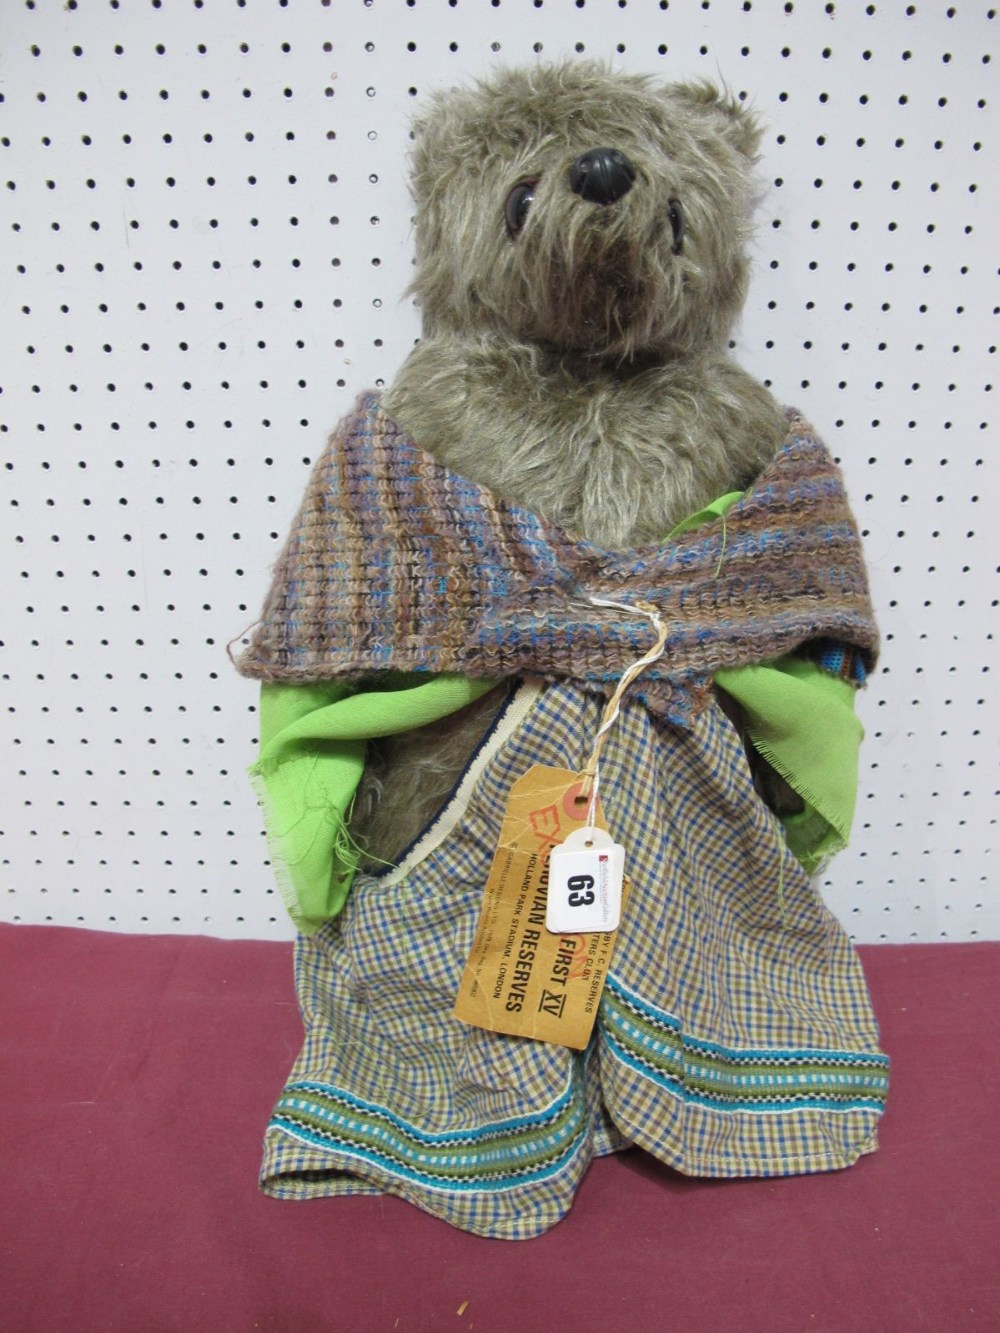 A Aunt Lucy "Paddington" Bear, circa late 1970's by Gabrielle, missing glasses and hat, rugby ticket